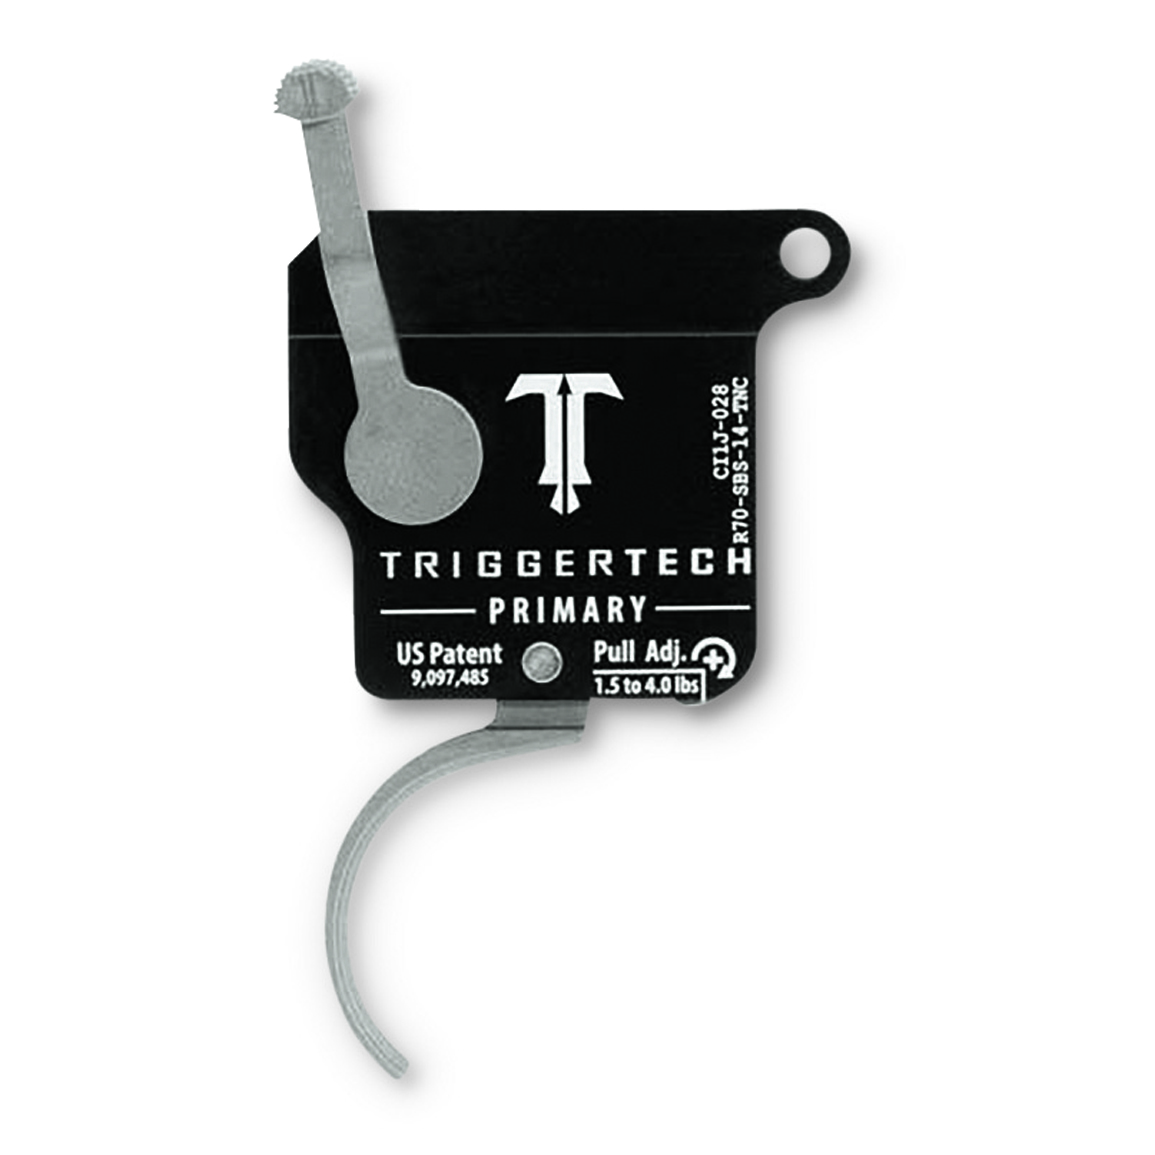 TriggerTech Remington 700 Primary Single-Stage Curved Trigger, Right Hand, No Bolt Release